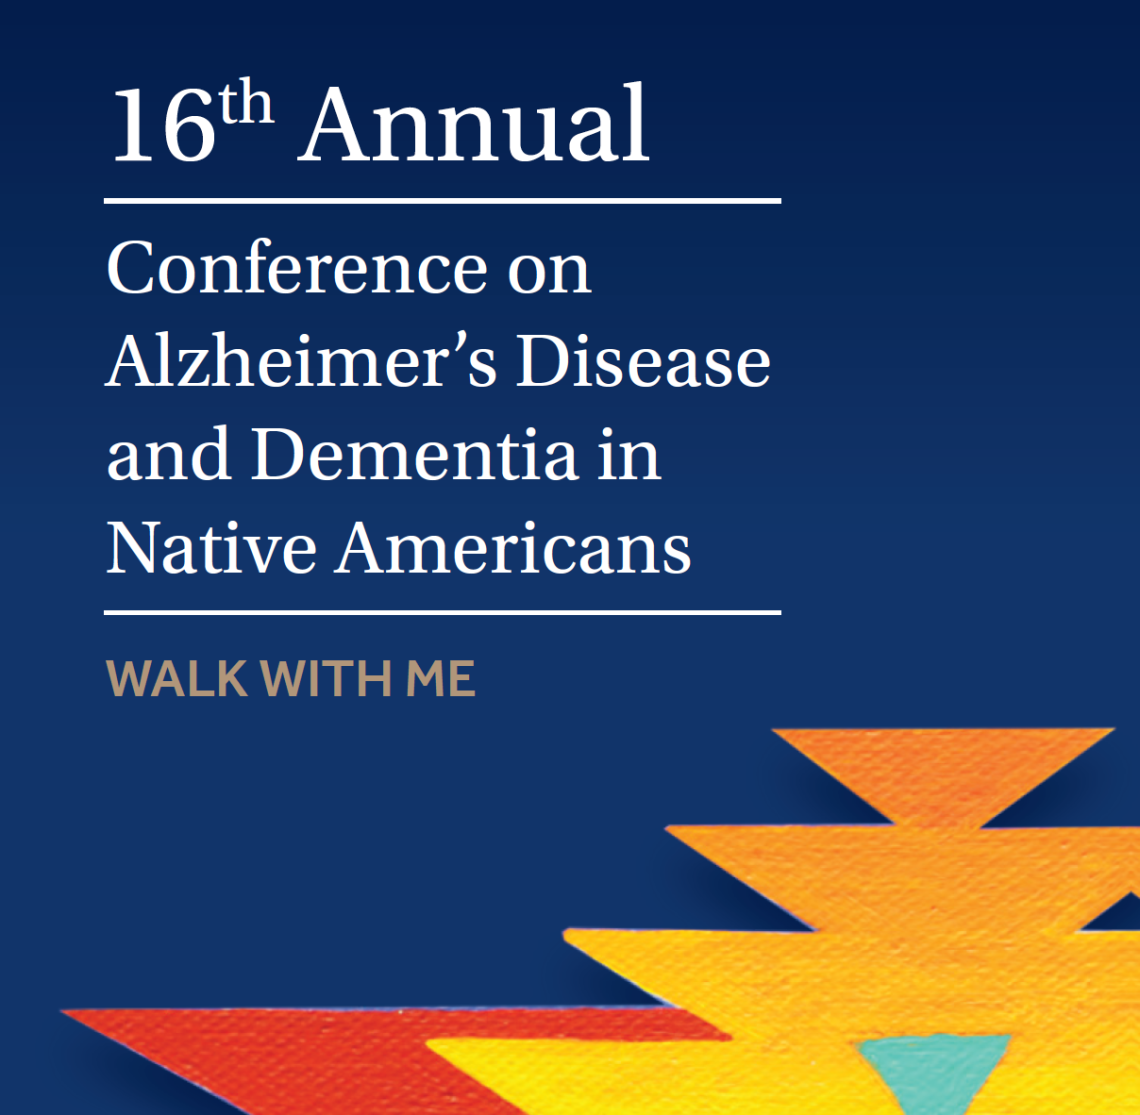 A6th Annual Conference on Alzheimer's Disease and Dementia in Native Americans